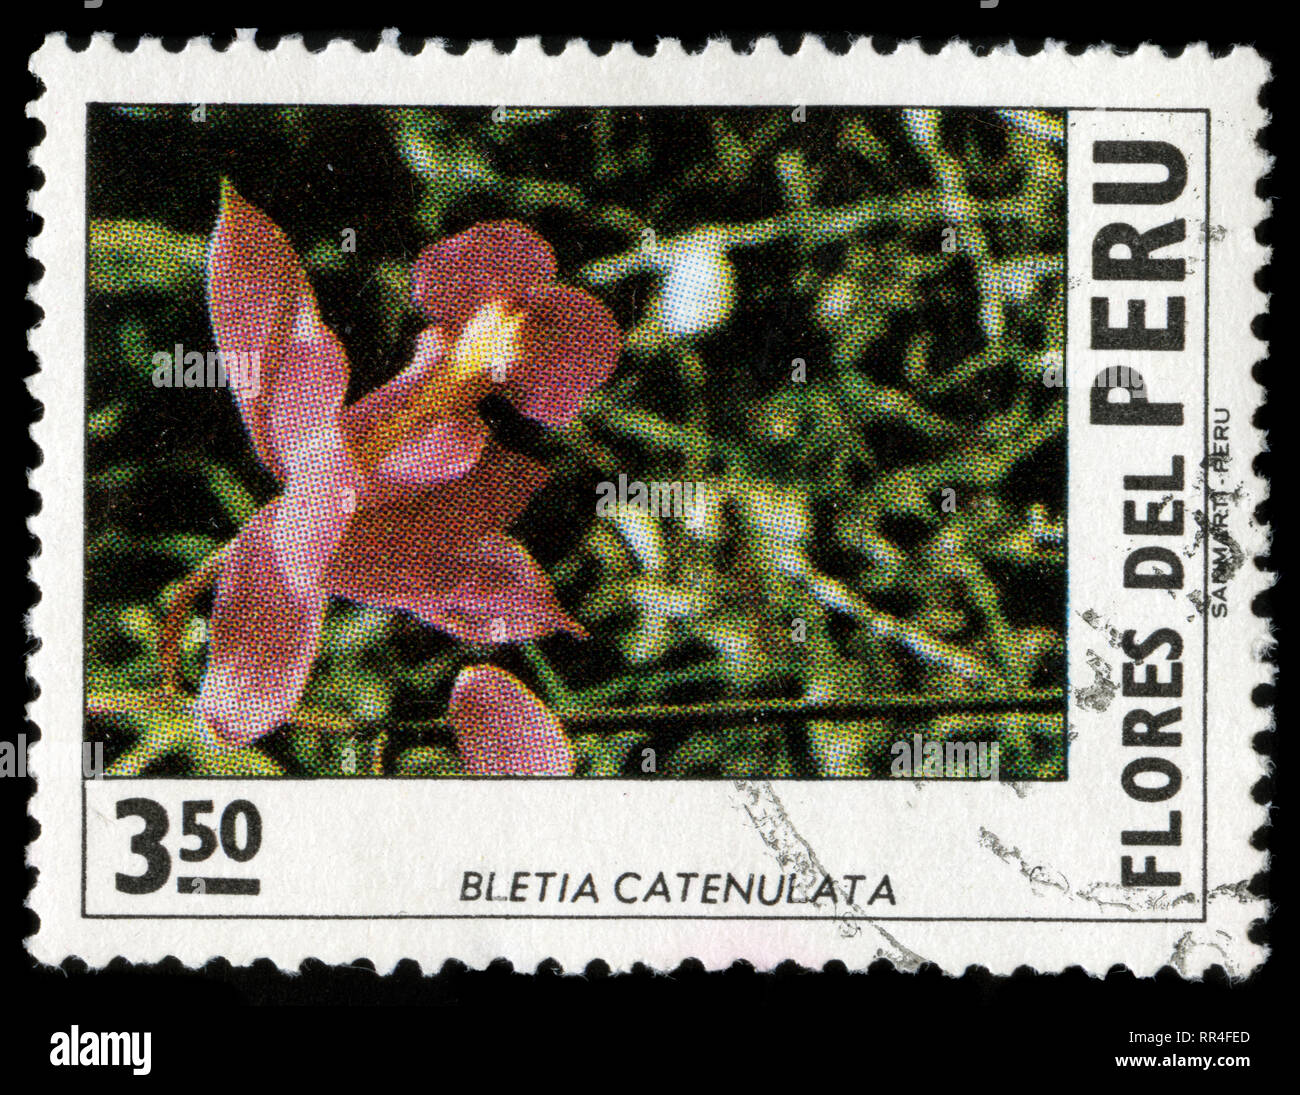 Postage stamp from Peru in the Peruvian flowers series issued in 1972 Stock Photo